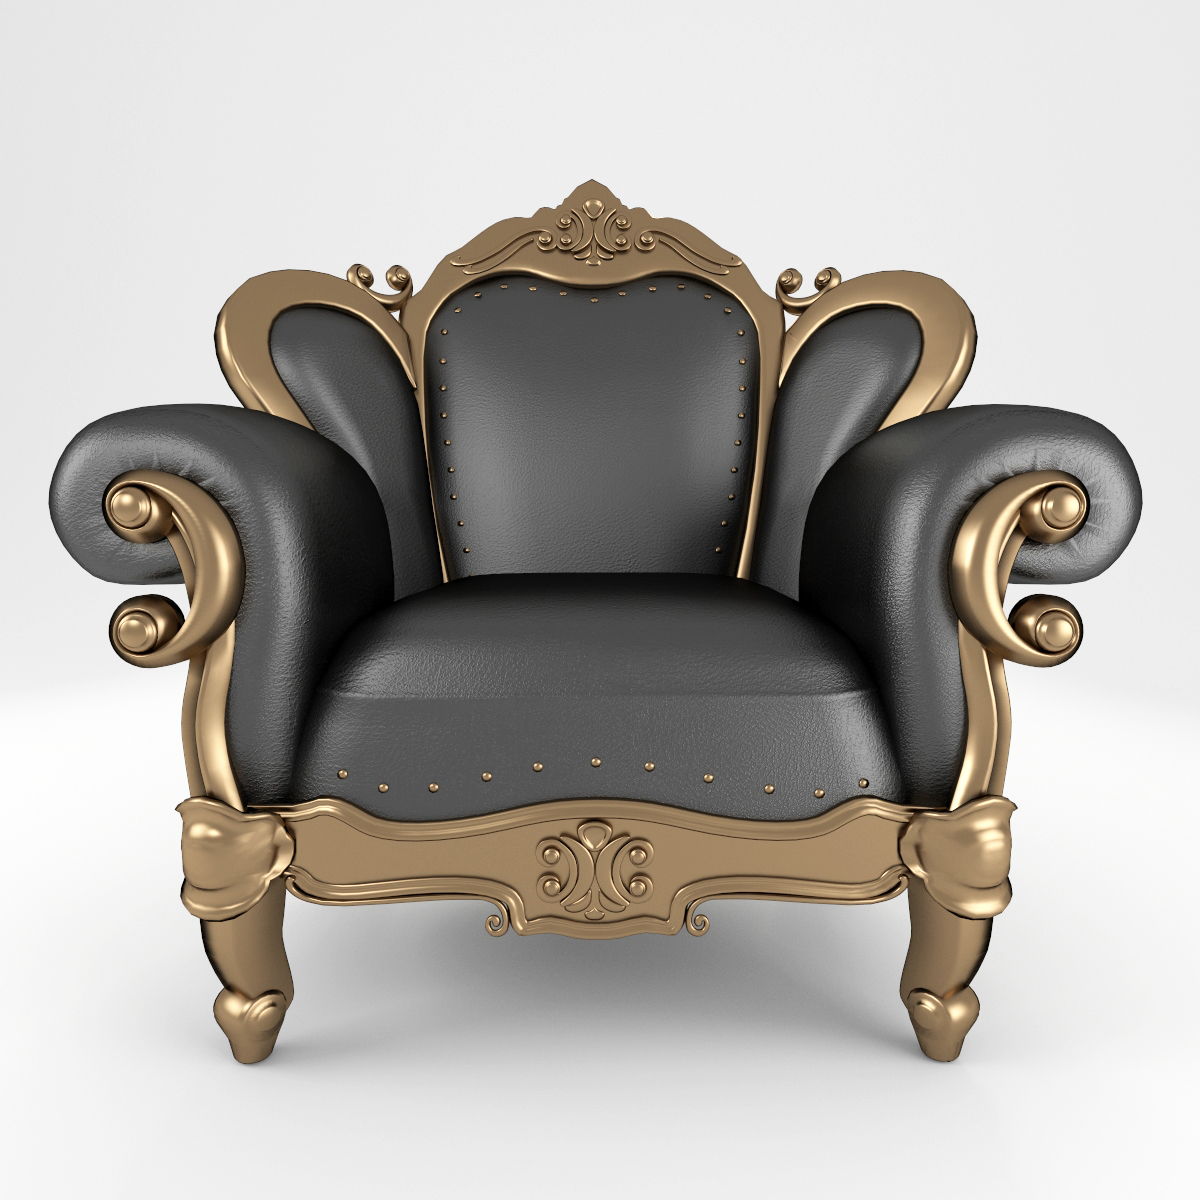 Most Luxurious Leather Chair In The World - Best Design Idea